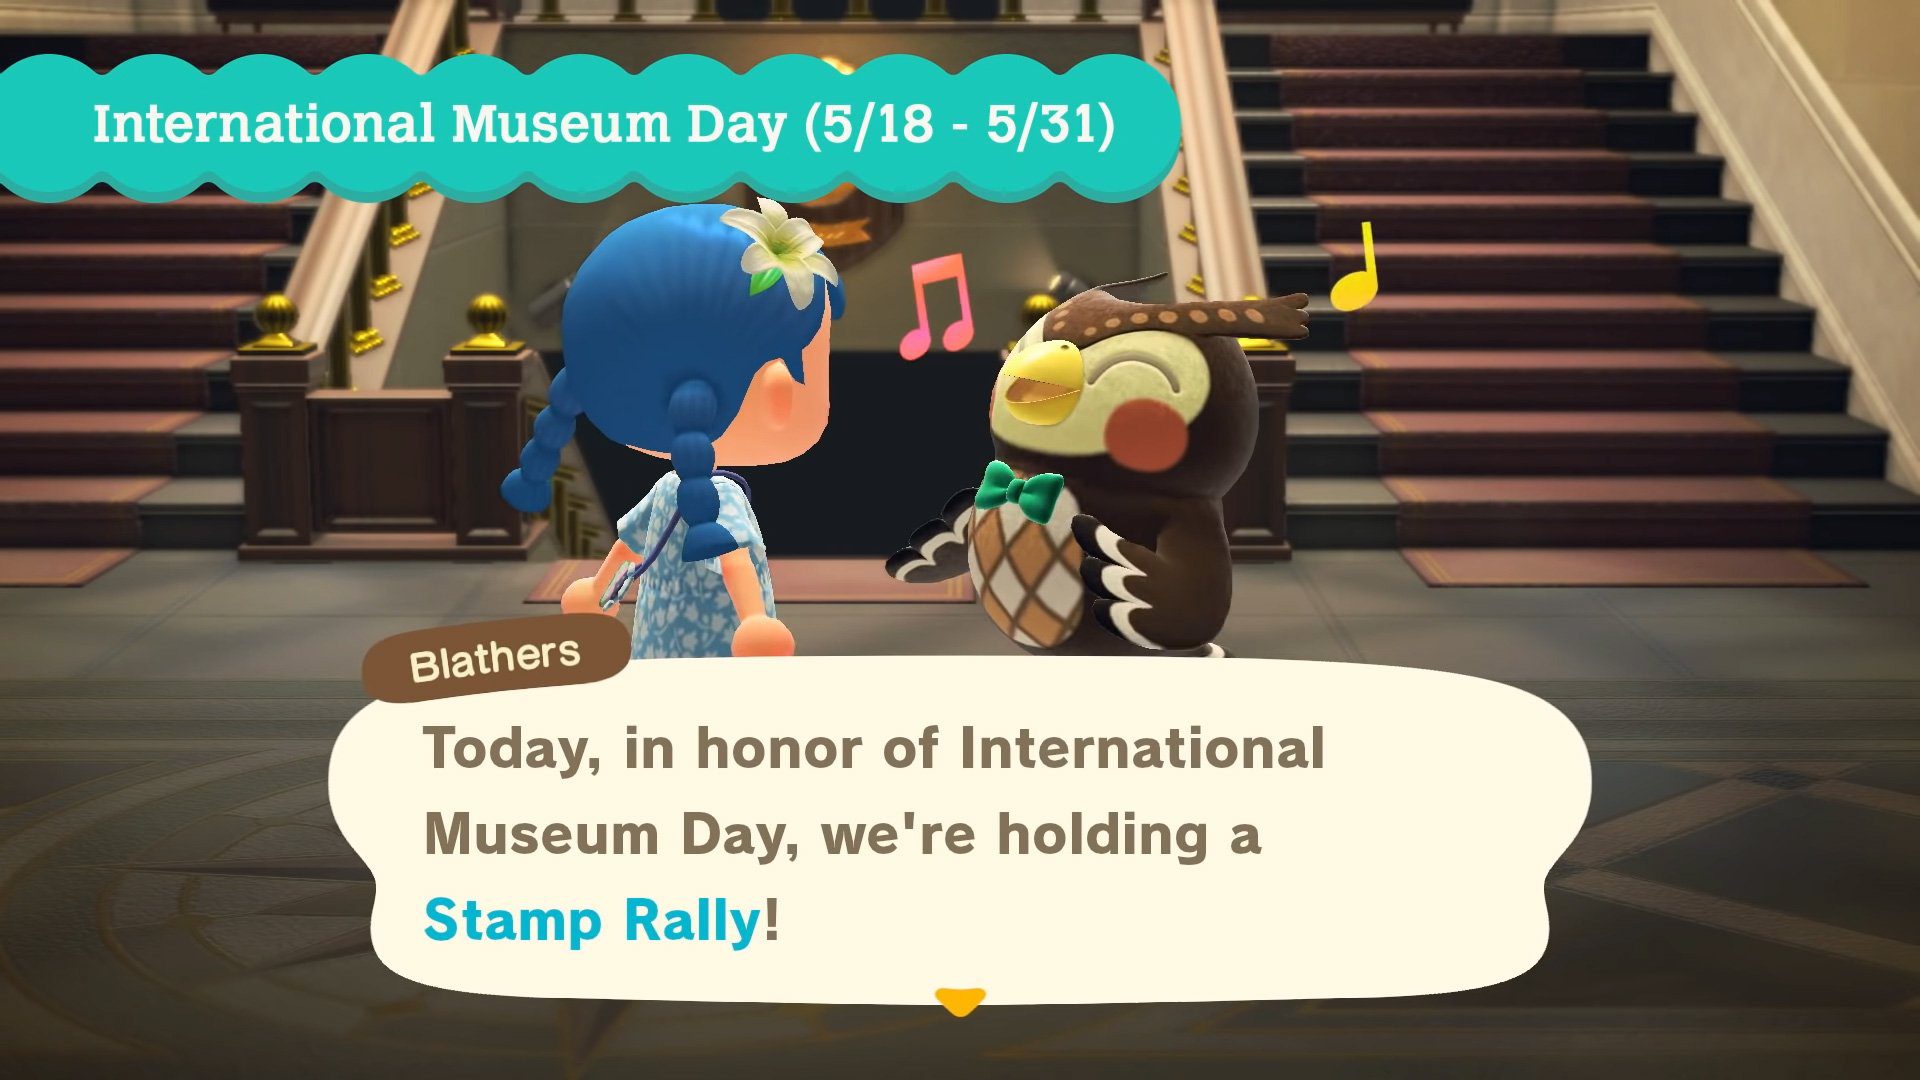 Don’t forget to drop by your Animal Crossing museum for the Stamp Rally